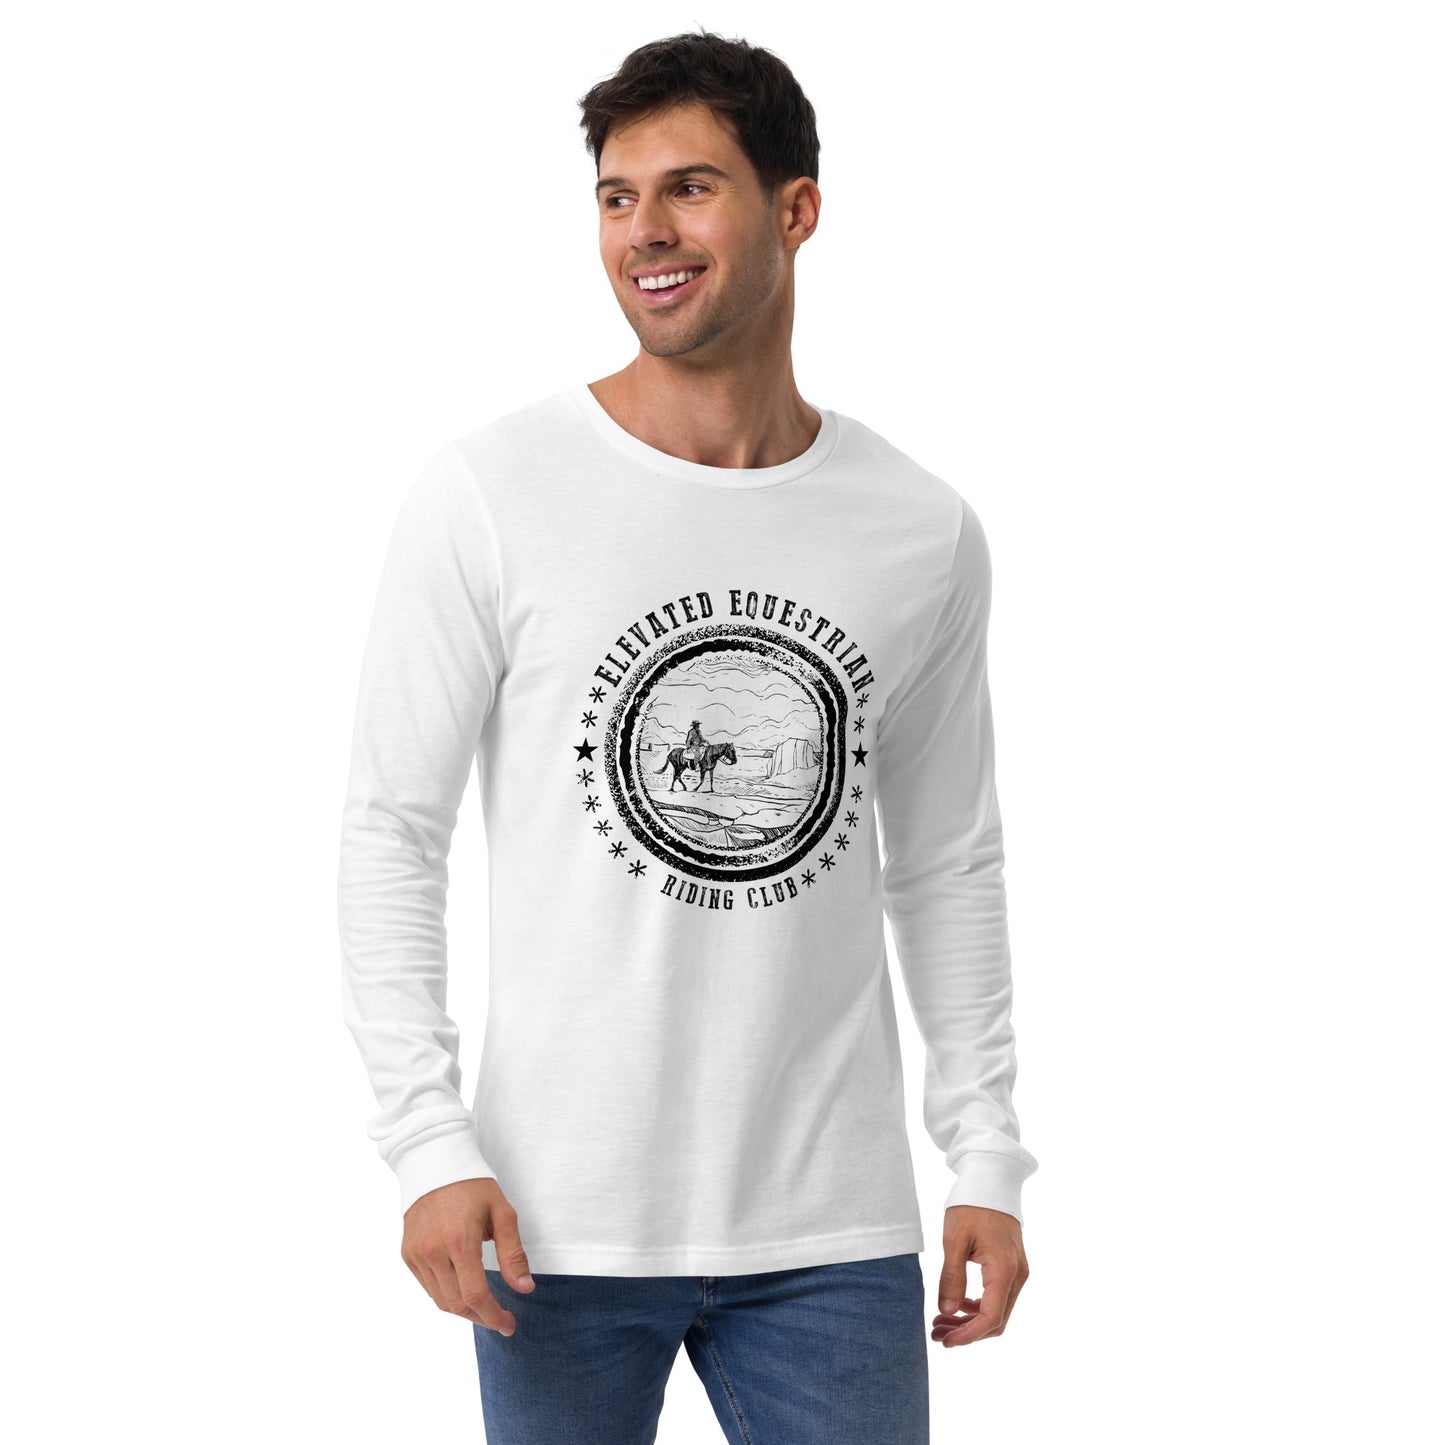 Elevated Equestrian Riding Club White Unisex Long Sleeve Tee